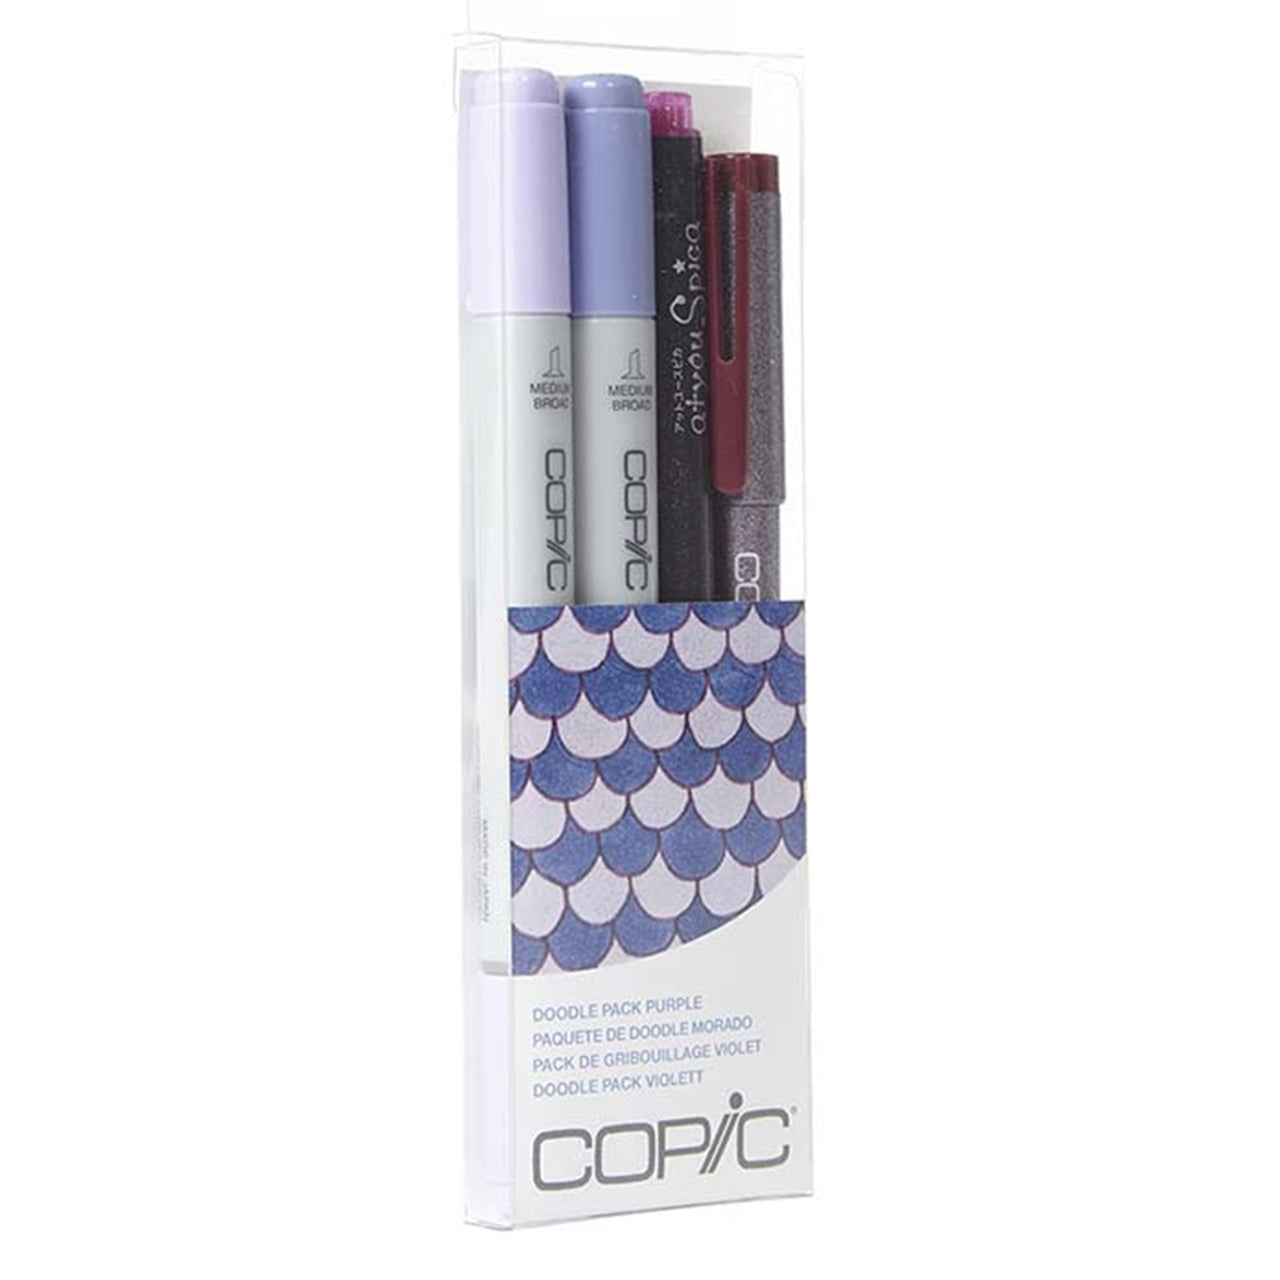 COPIC Ciao Doodle Pack Purple